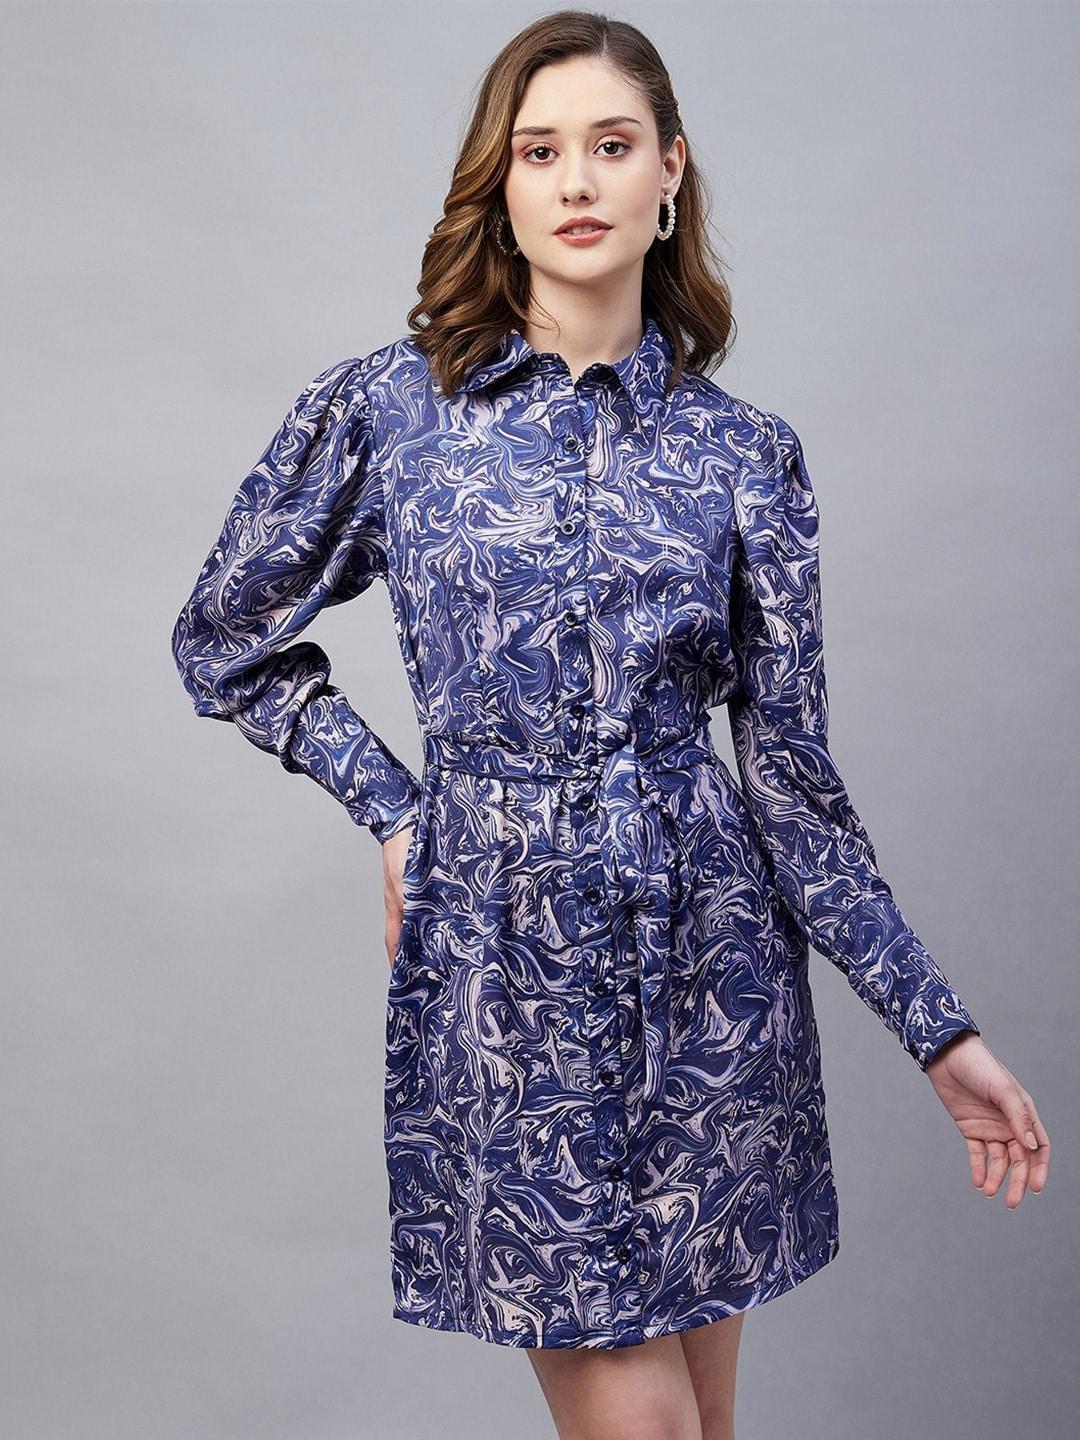 marie claire abstract printed satin shirt dress